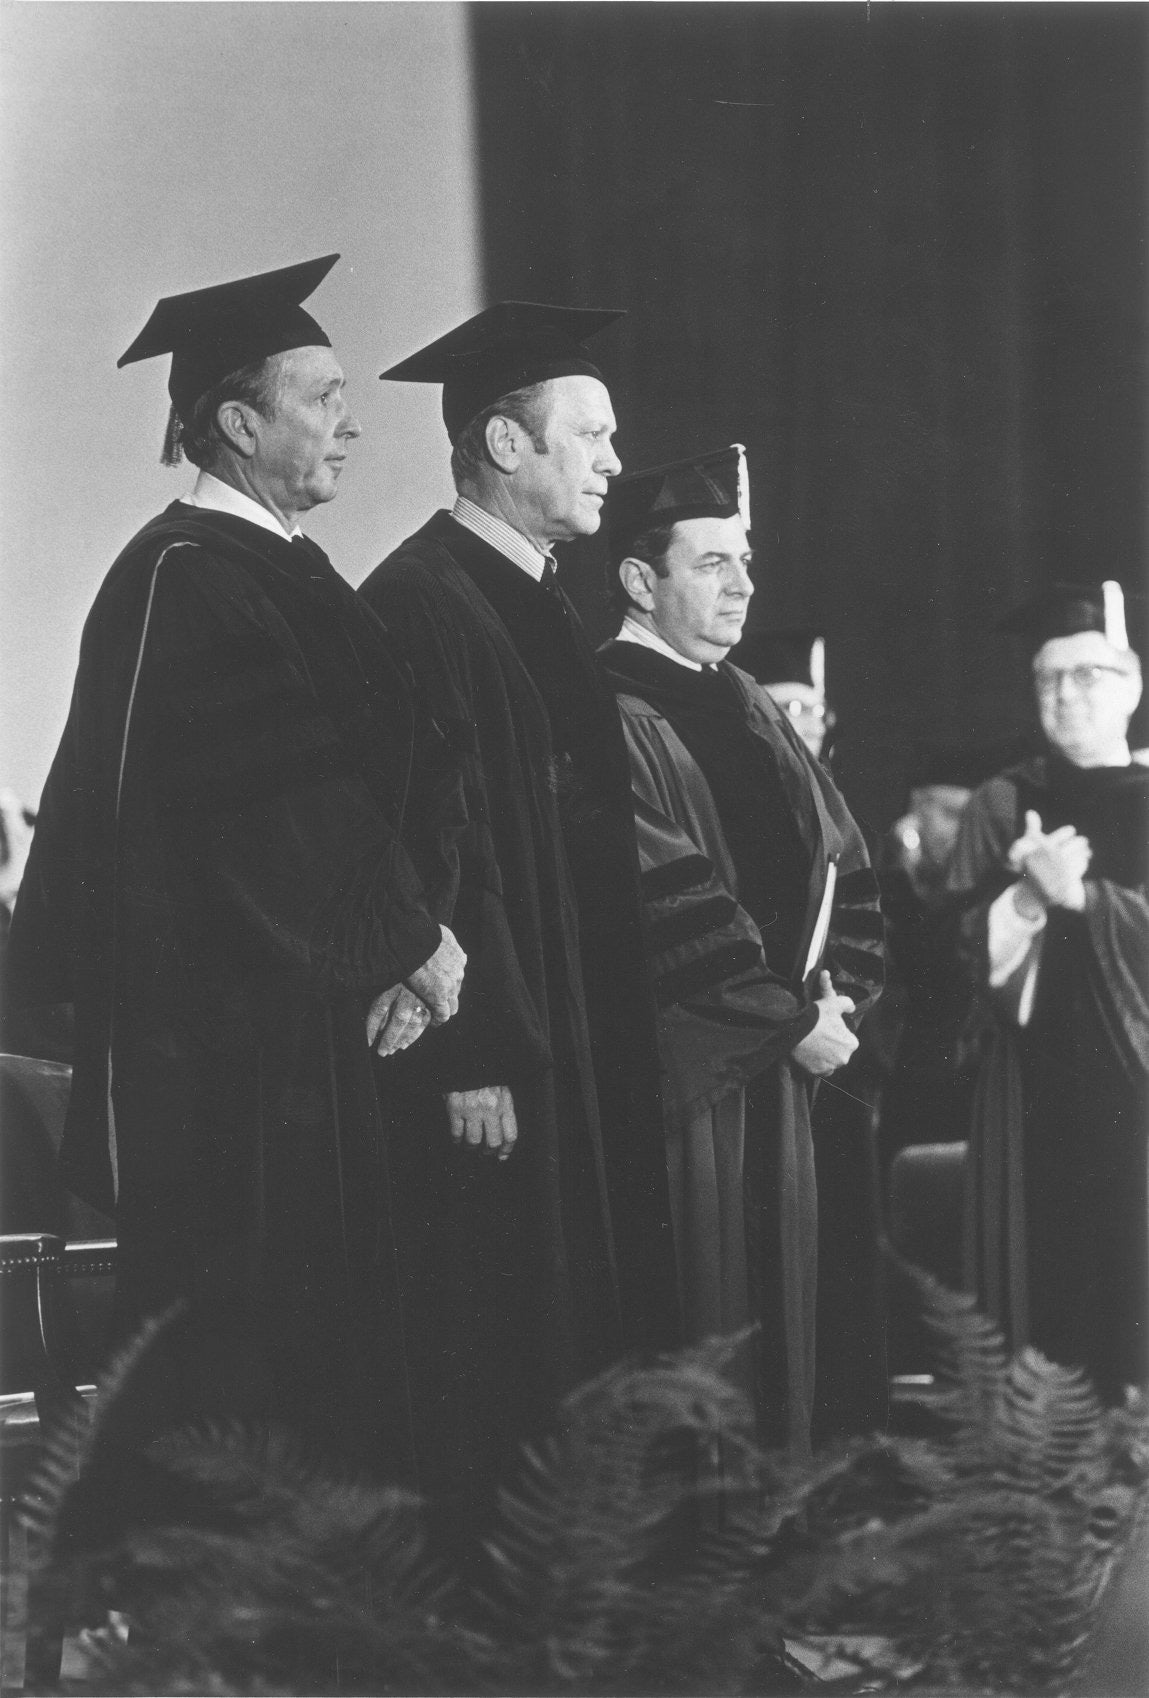 President Gerald Ford at Commencement, 1975